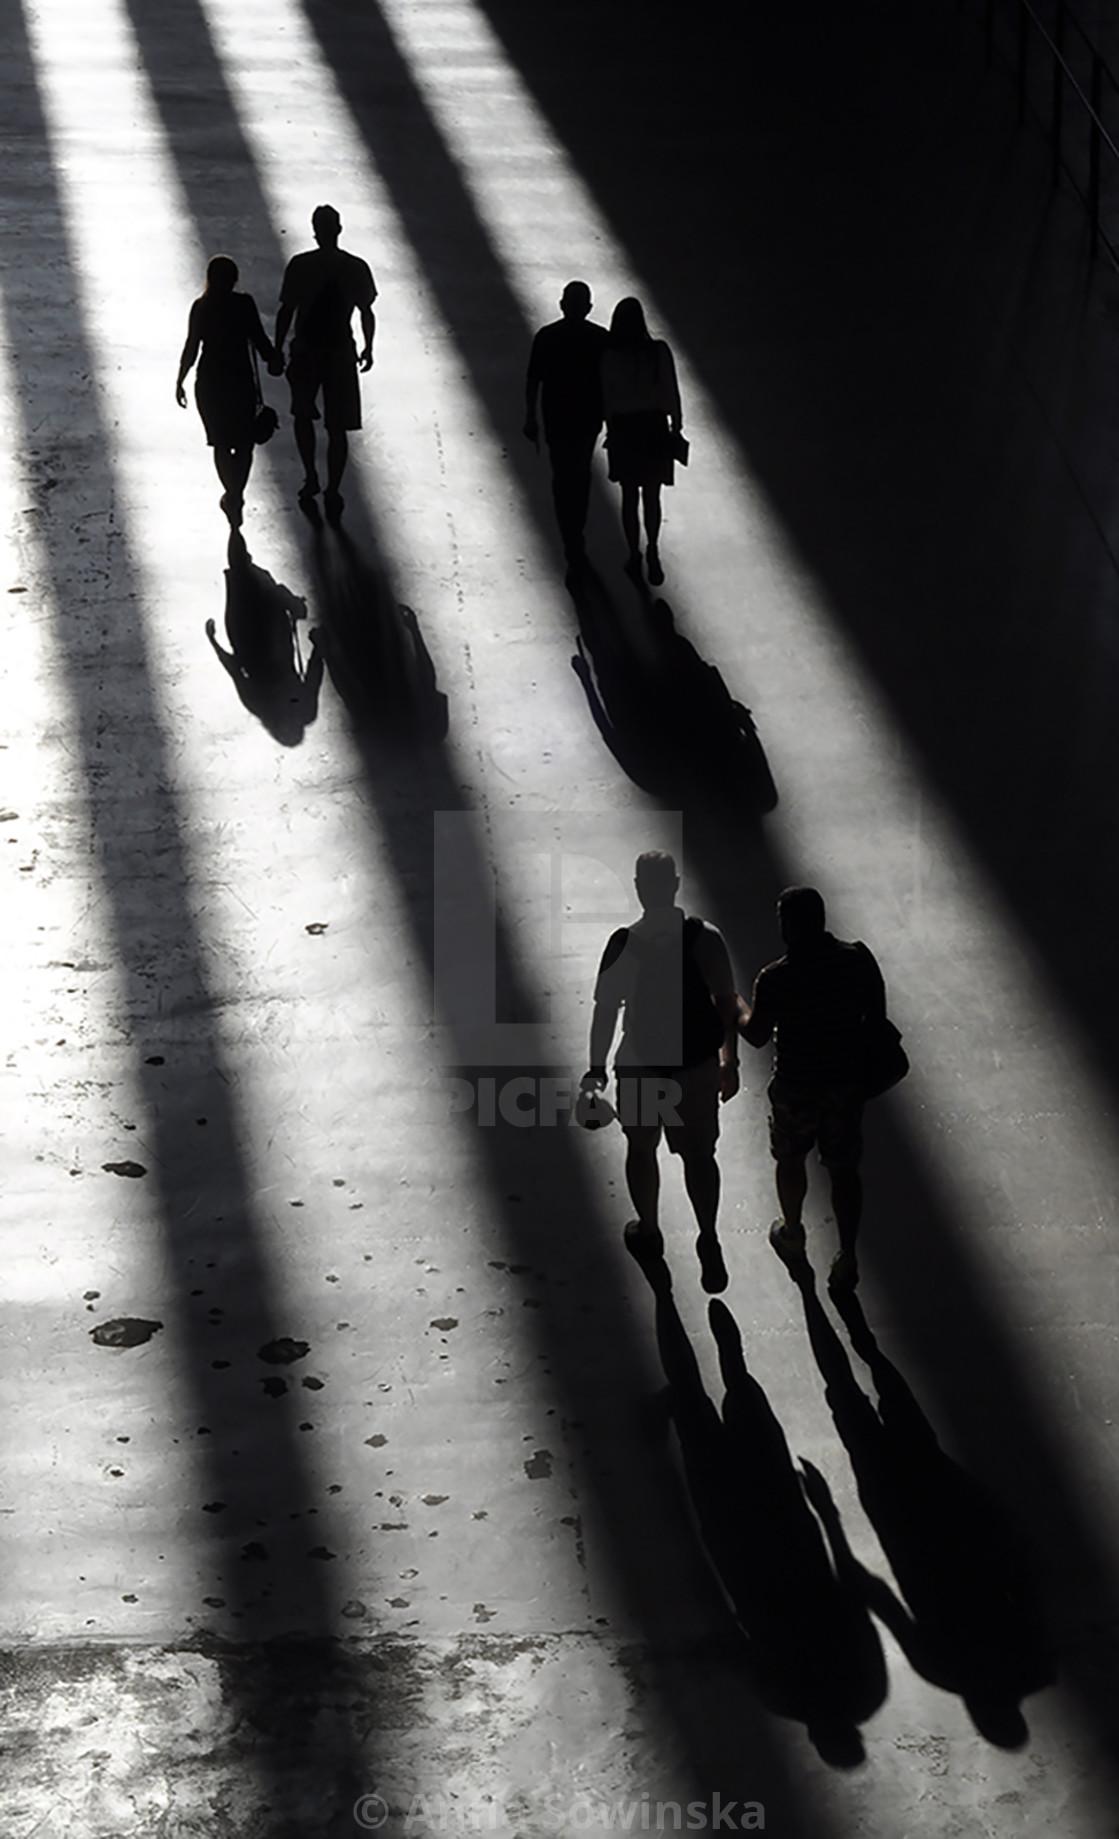 "people and shadows" stock image